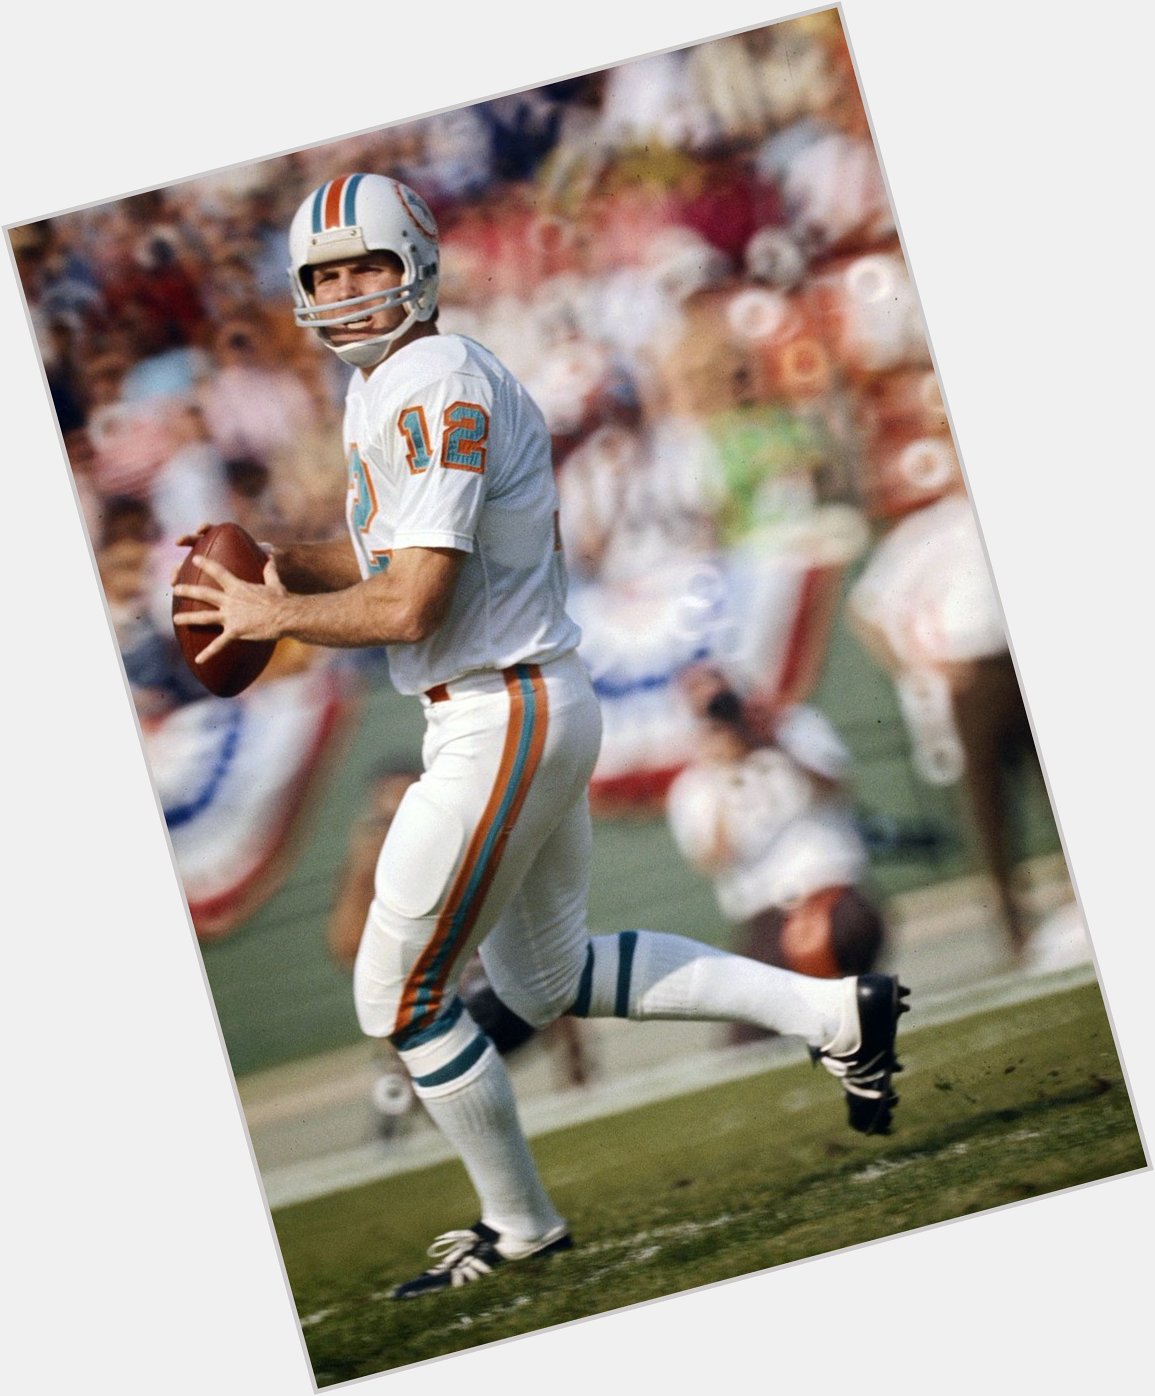 Happy Birthday to Bob Griese, who turns 73 today. 